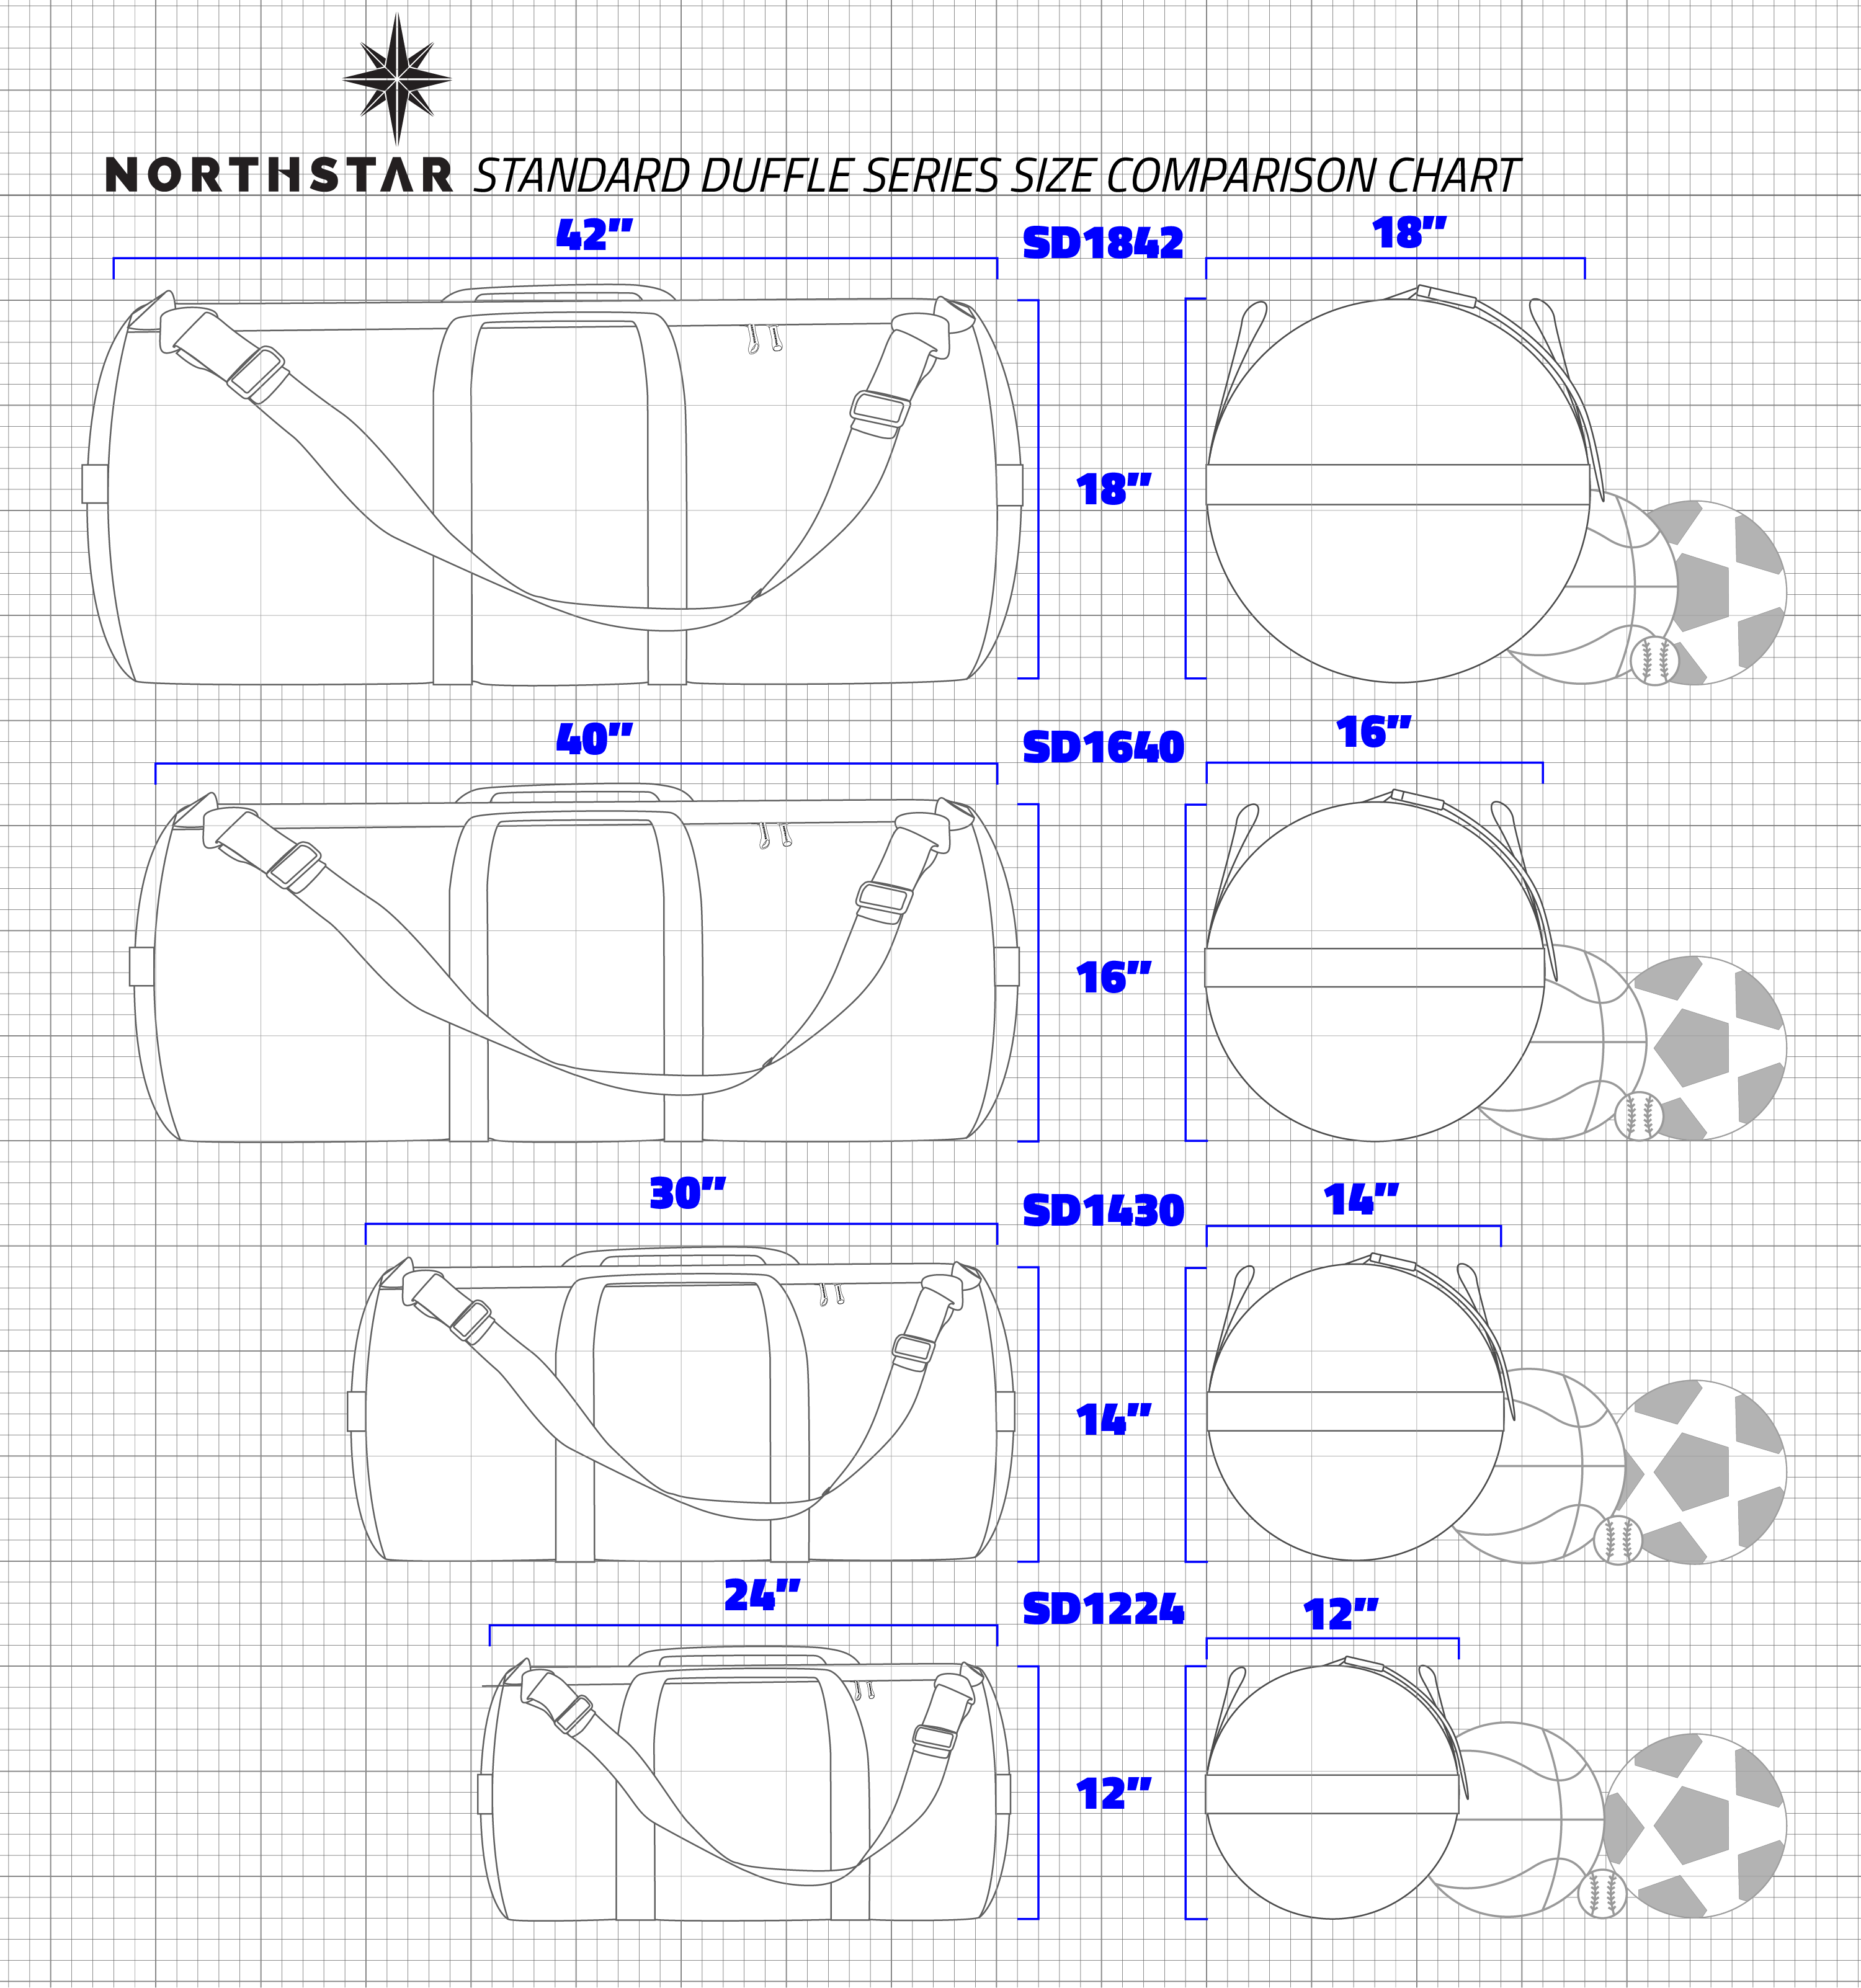 Line drawing comparison of the Northstar Standard Duffle Series bag sizes. SD1224, SD1430, SD1640, and SD1842. 